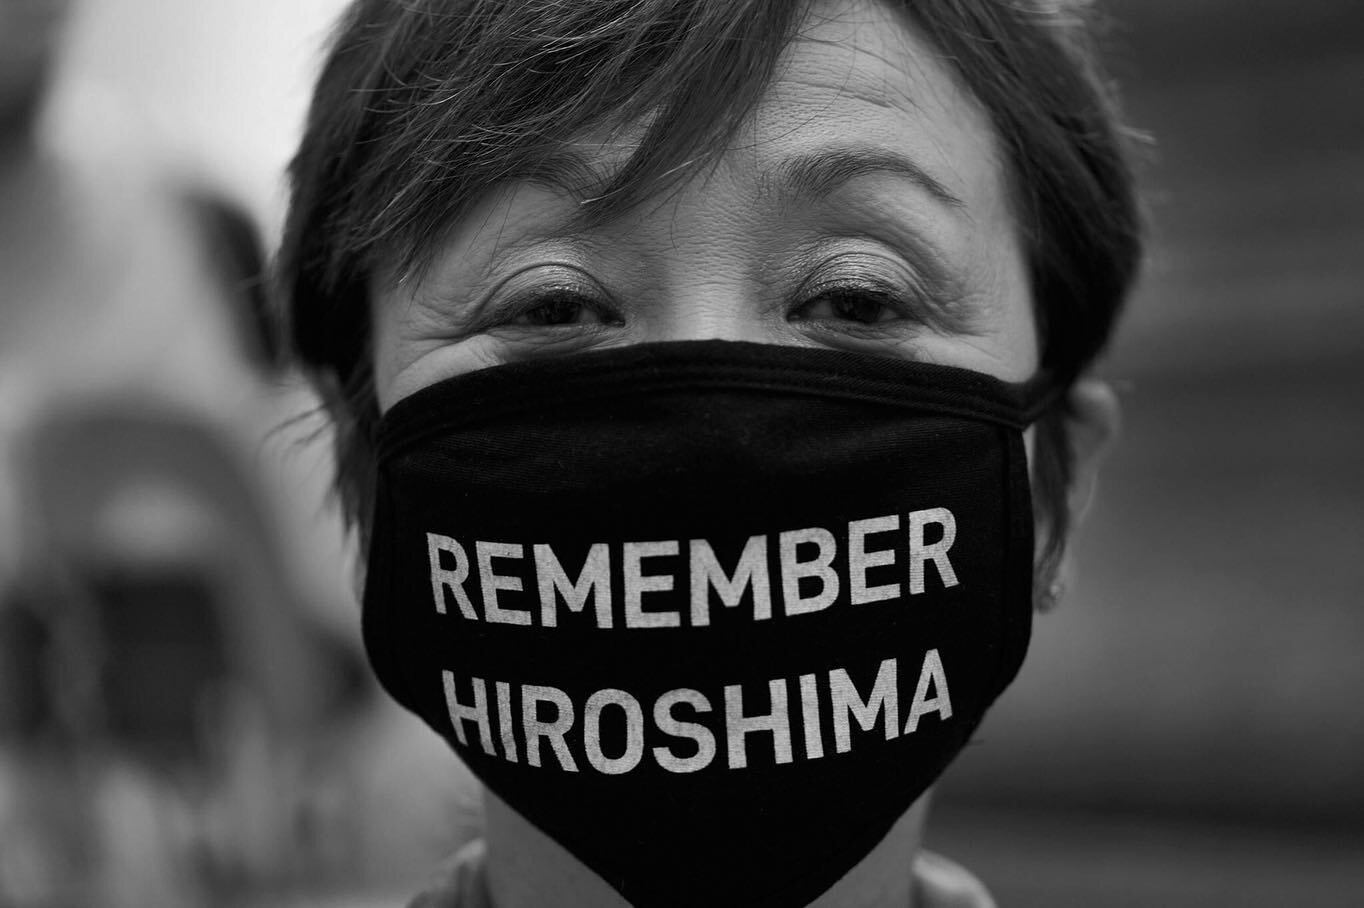 Powerful black and white photos taken by @aperture.delta of NYCAN&rsquo;s action at the David N. Dinkins Municipal Building in Manhattan on Friday, August 6th, the 76th Anniversary of the bombing of Hiroshima.

New Yorkers of all backgrounds continue